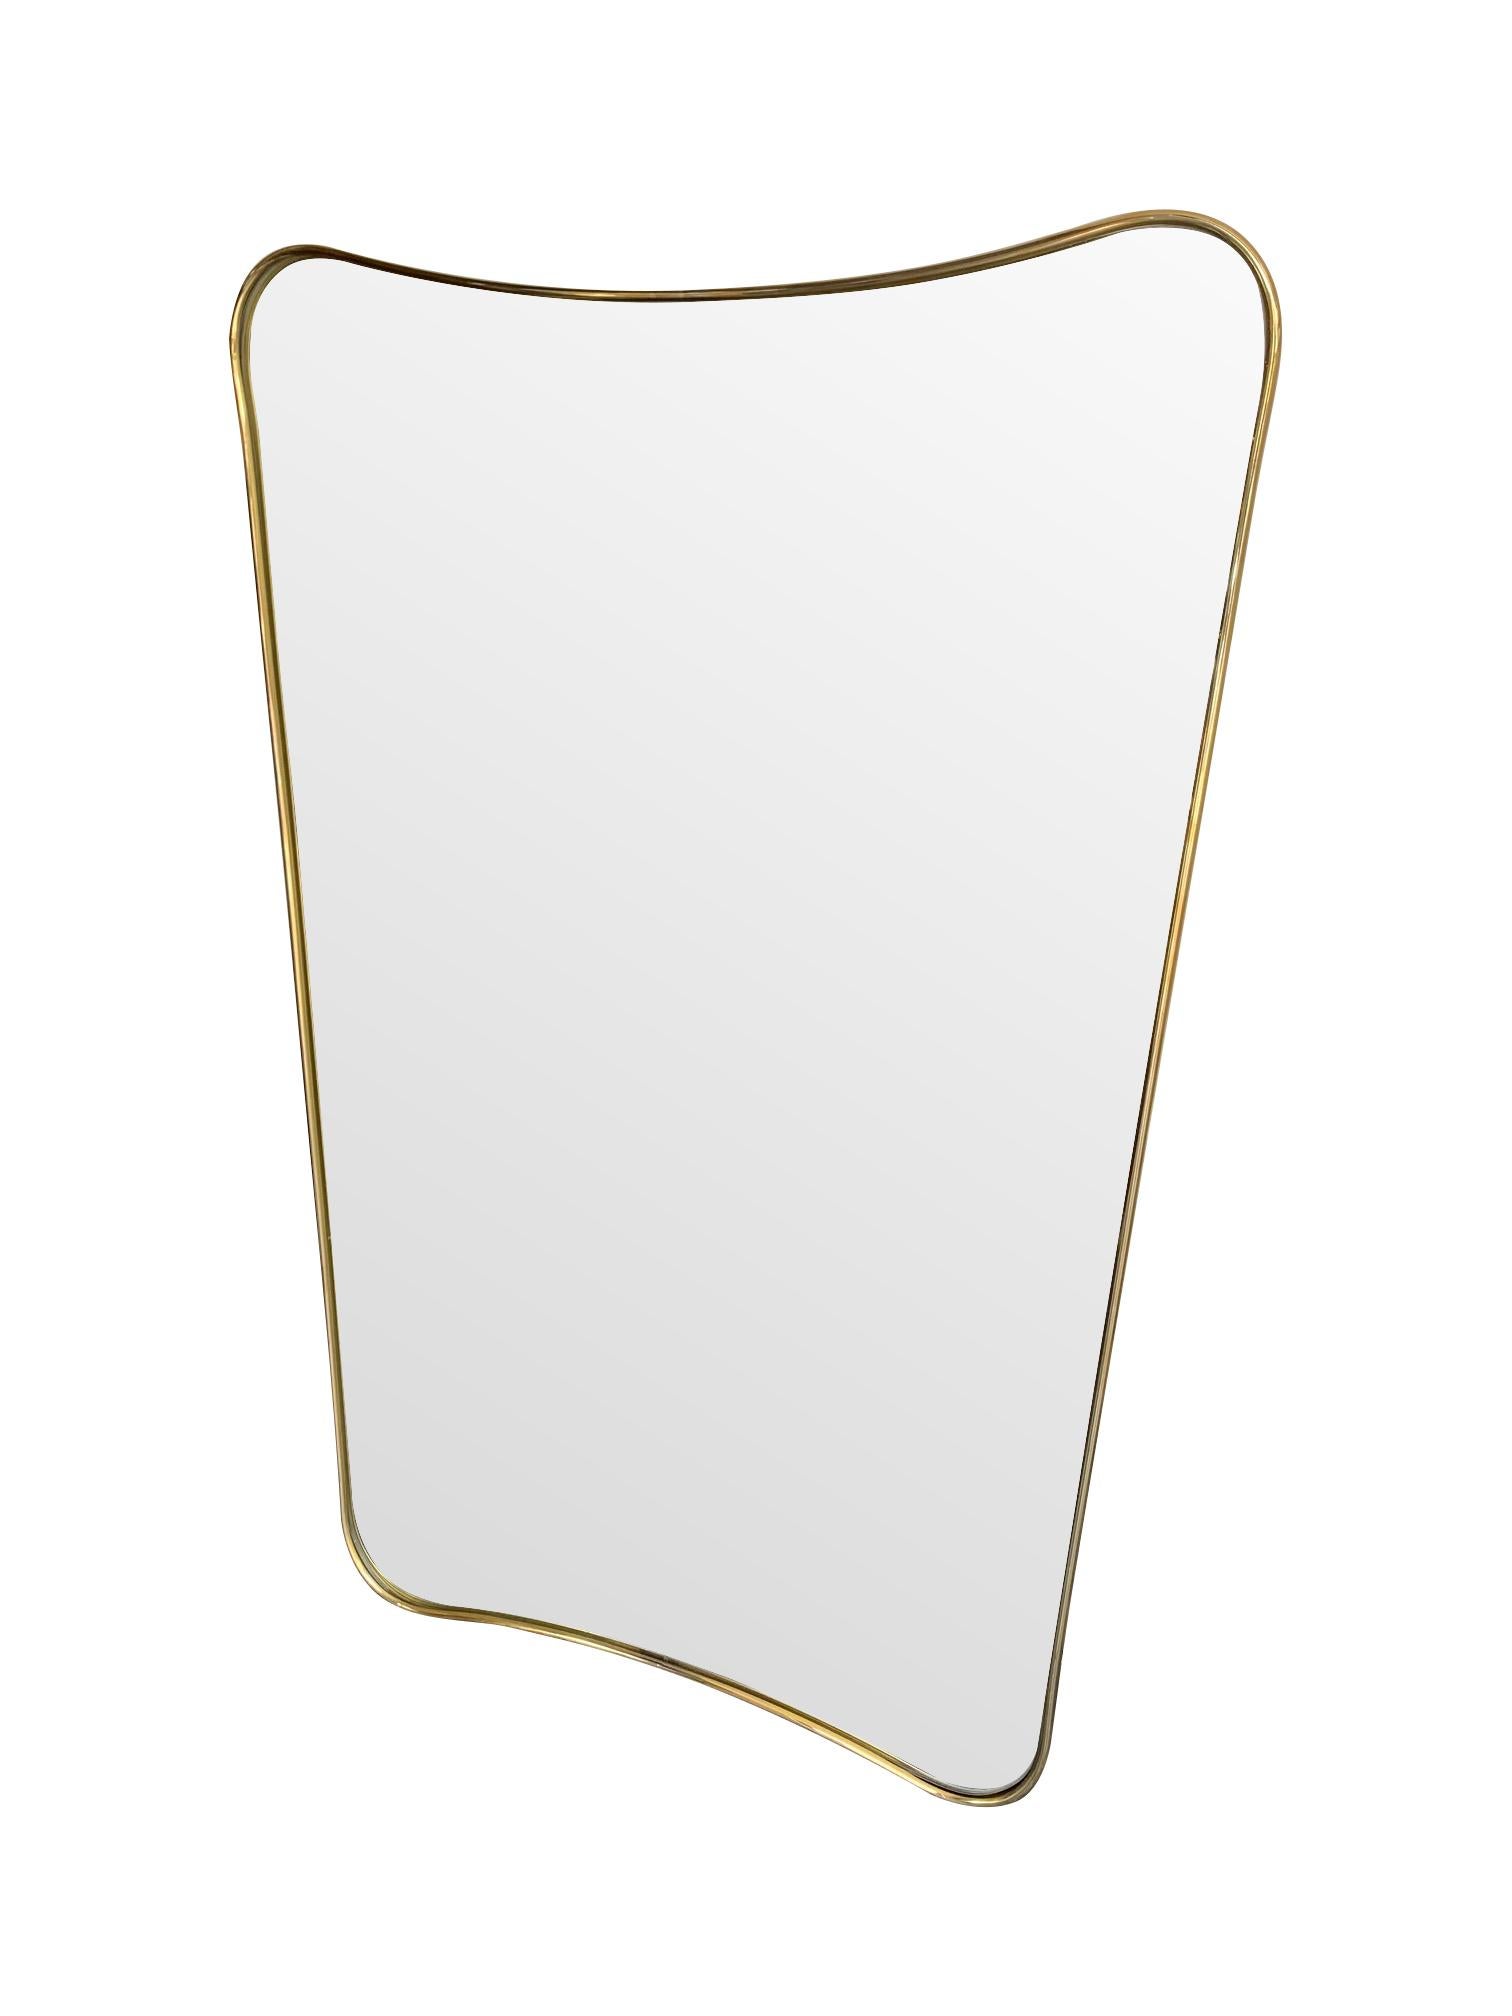 An Italian shield mirror with brass surround in the style of Gio Ponti with curved and tapered frame.

These are made to order in Italy and take 4-6 weeks to make and deliver to London. Two other sizes are 145cm high and 161cm high.